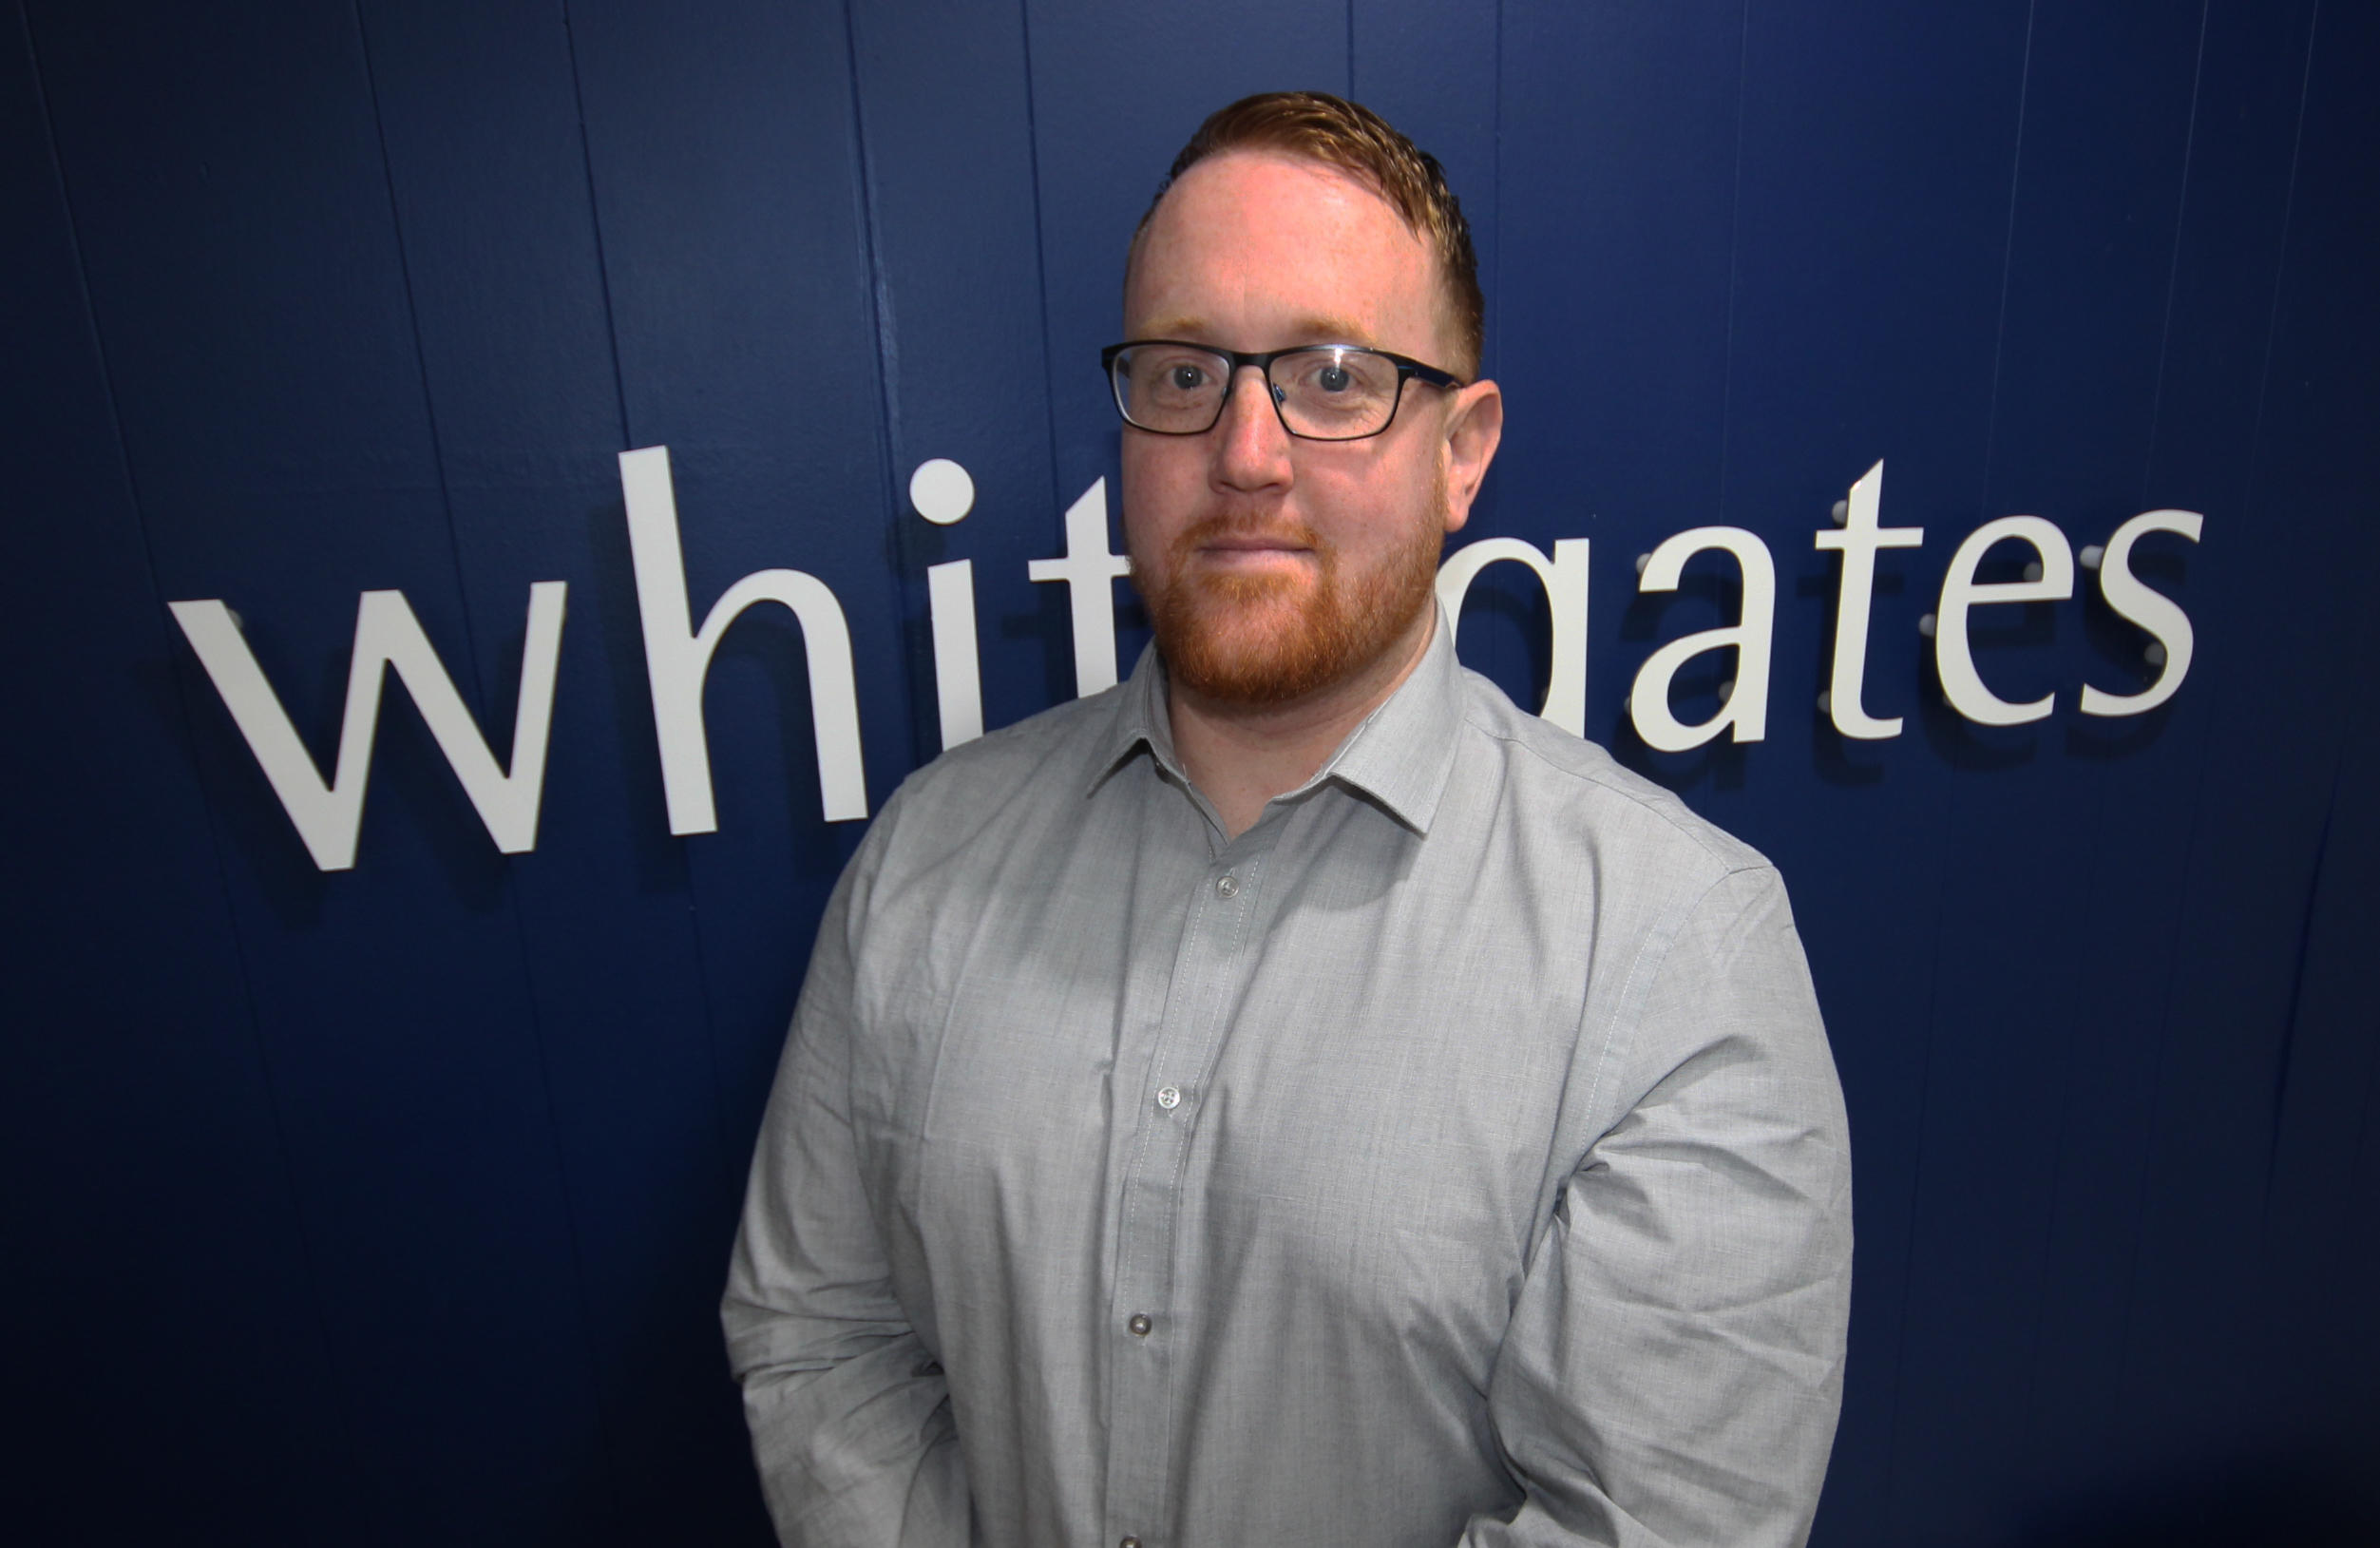 Images Whitegates Mansfield Lettings & Estate Agents